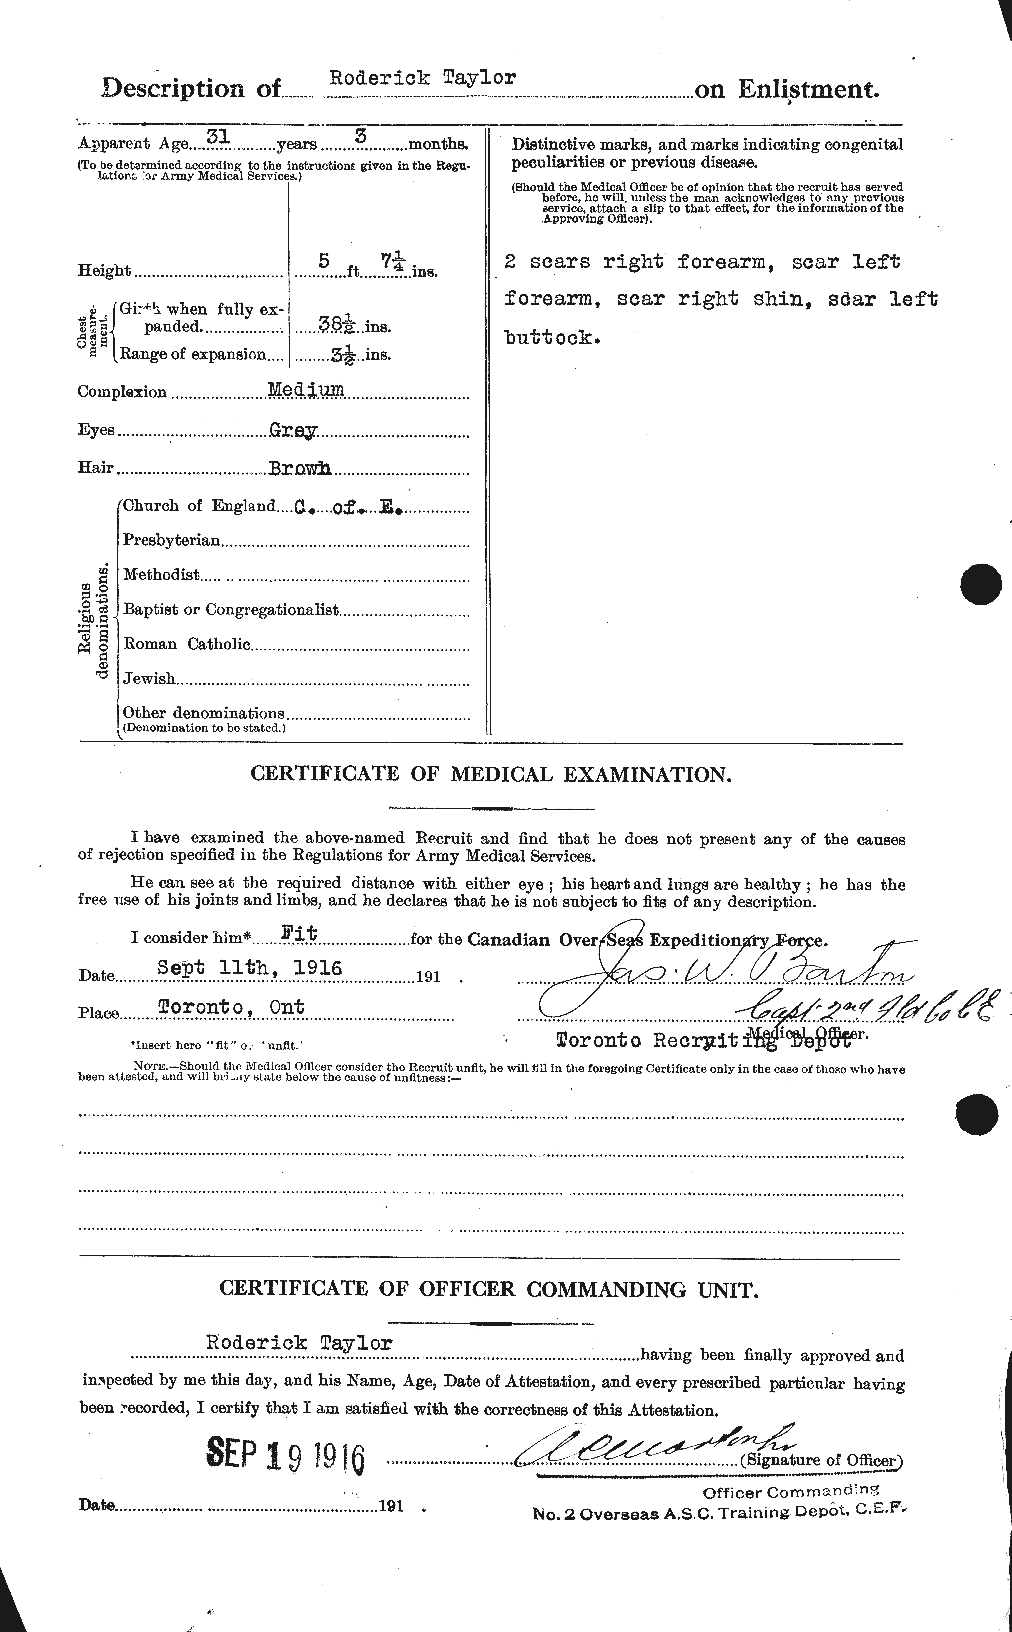 Personnel Records of the First World War - CEF 627502b